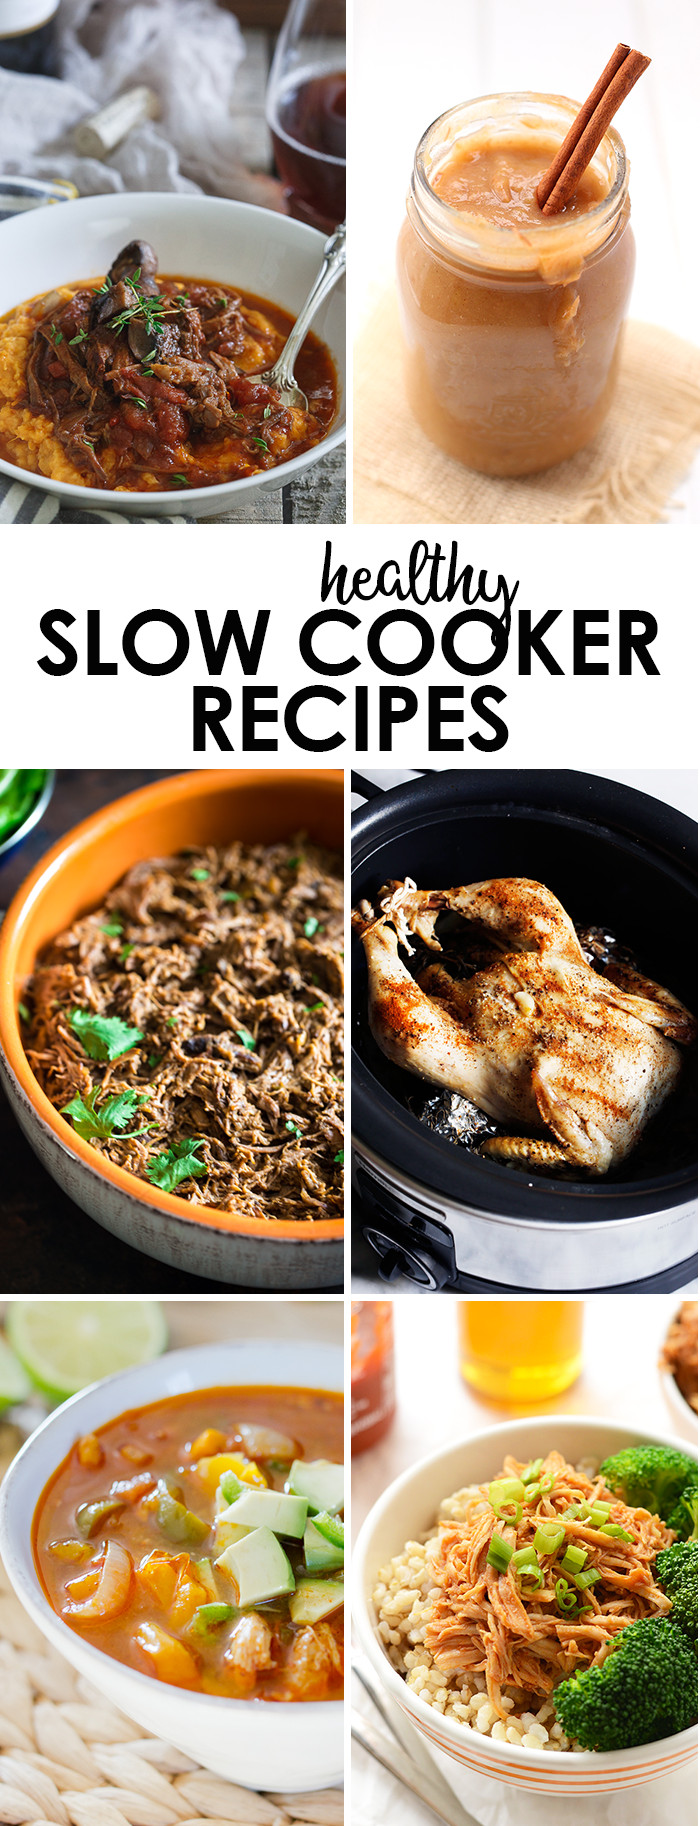 Slow Cooker Recipes Healthy 20 Best Ideas 5 Ingre Nt Honey Sriracha Slow Cooker Chicken Fit